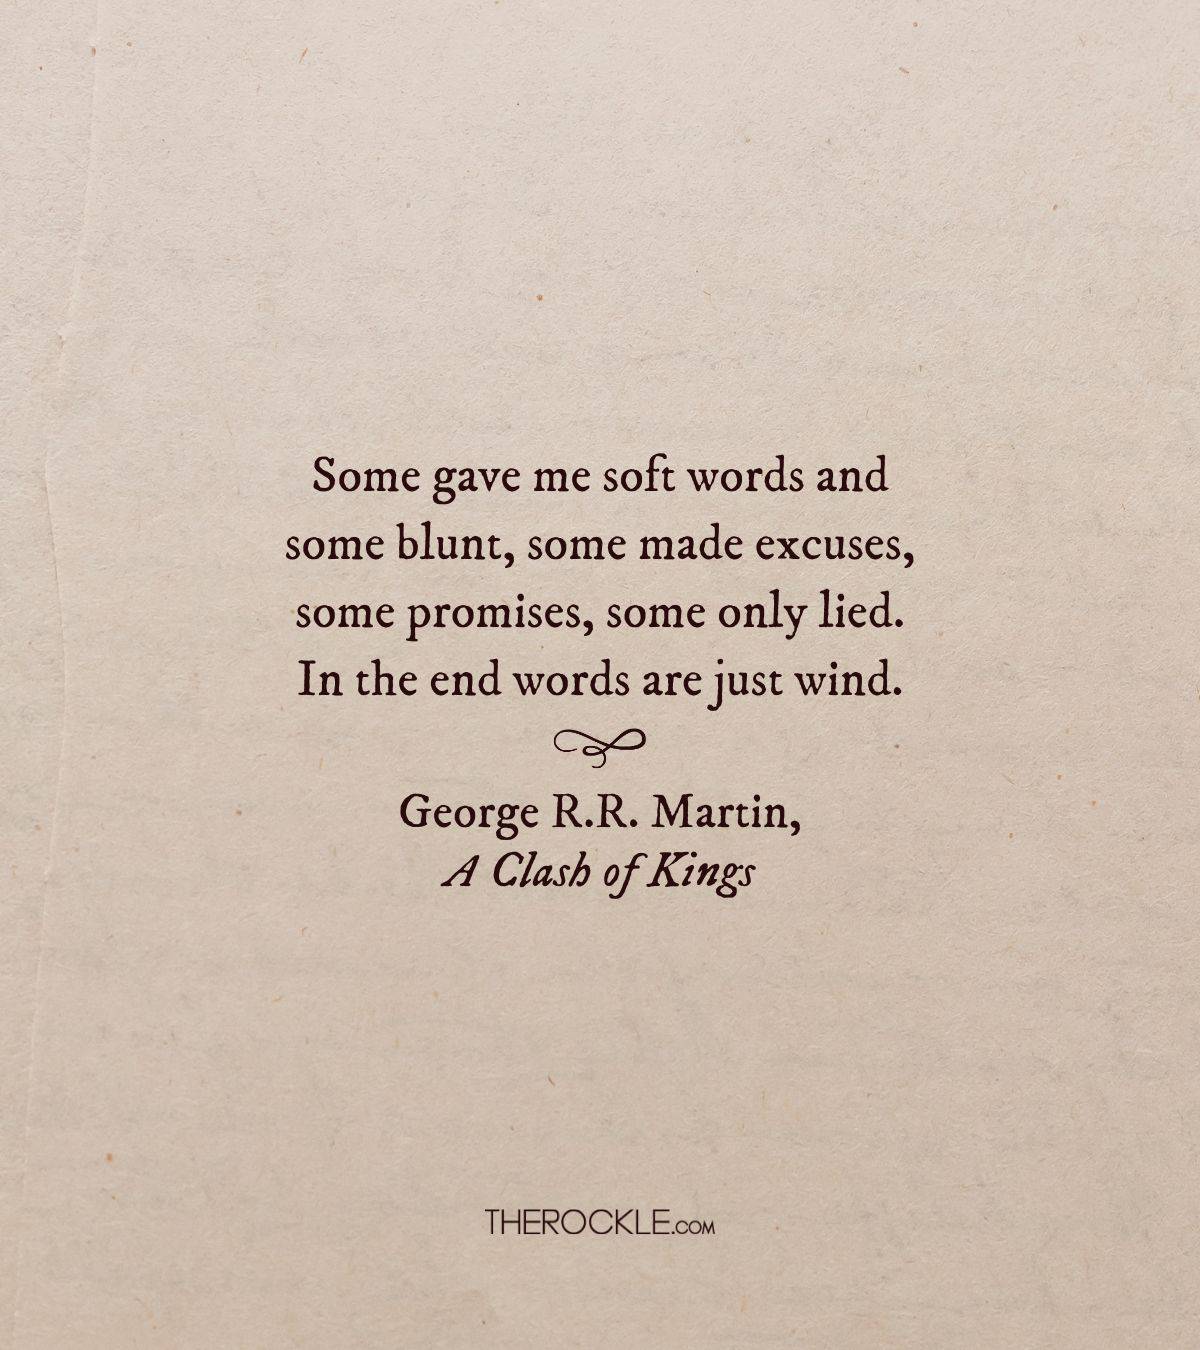 George R.R. Martin on meaningless words